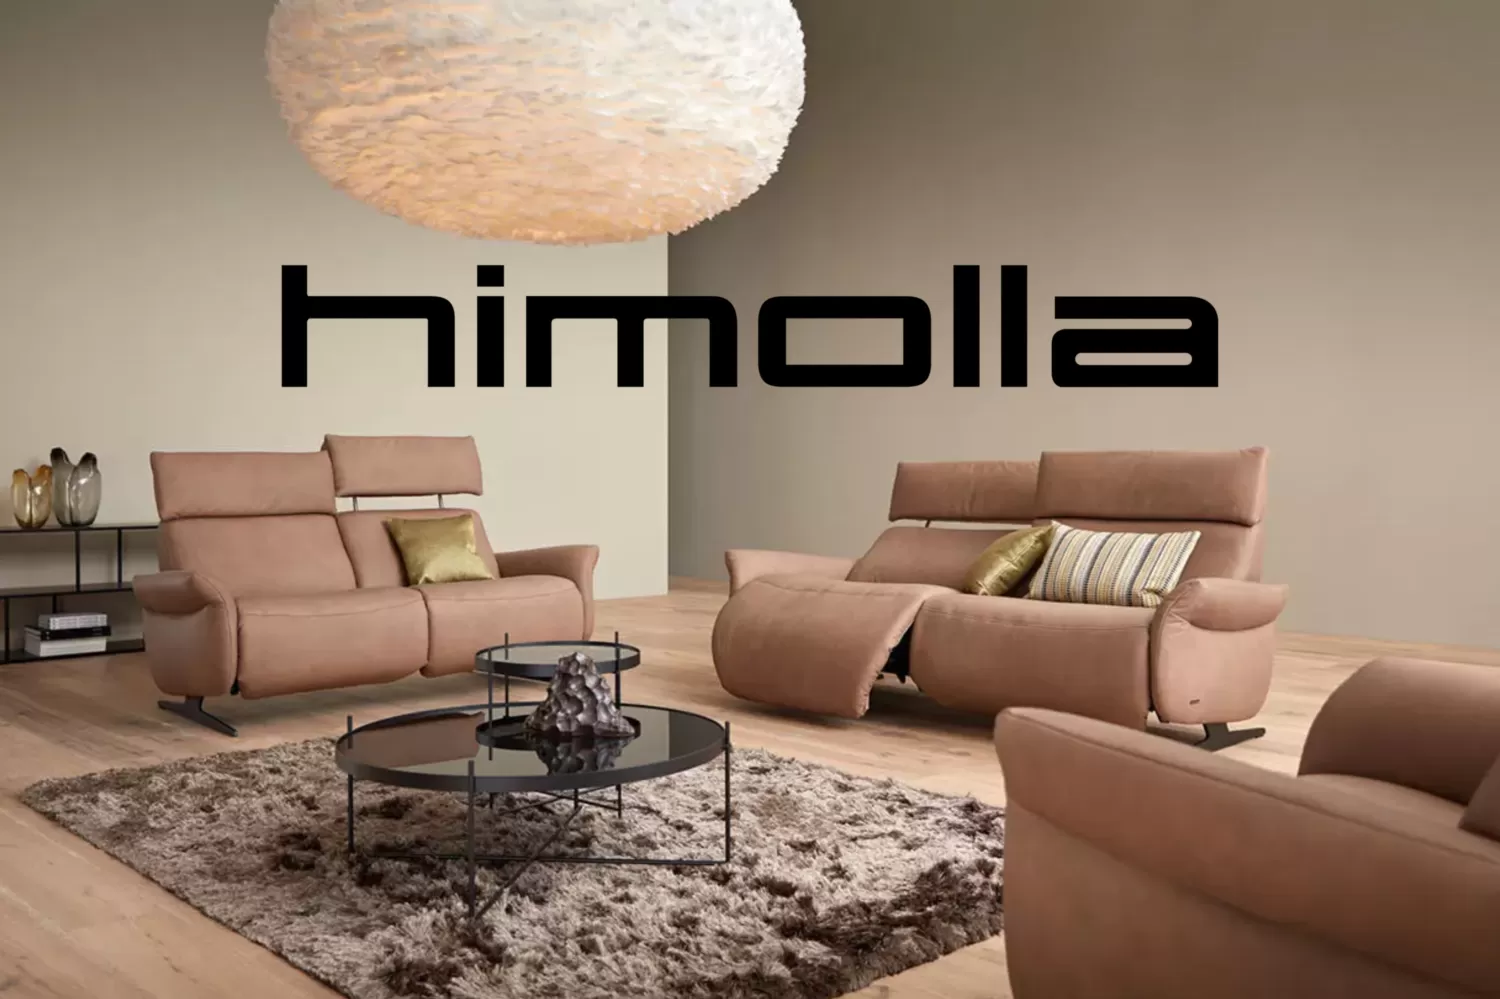 Where Comfort Meets Refinement

For stunning award-winning sofas, sofa groups and recliners, Himolla is a high quality German brand, wholly committed to the customer. Your total relaxation is key to the design and construction of every beautiful product.
